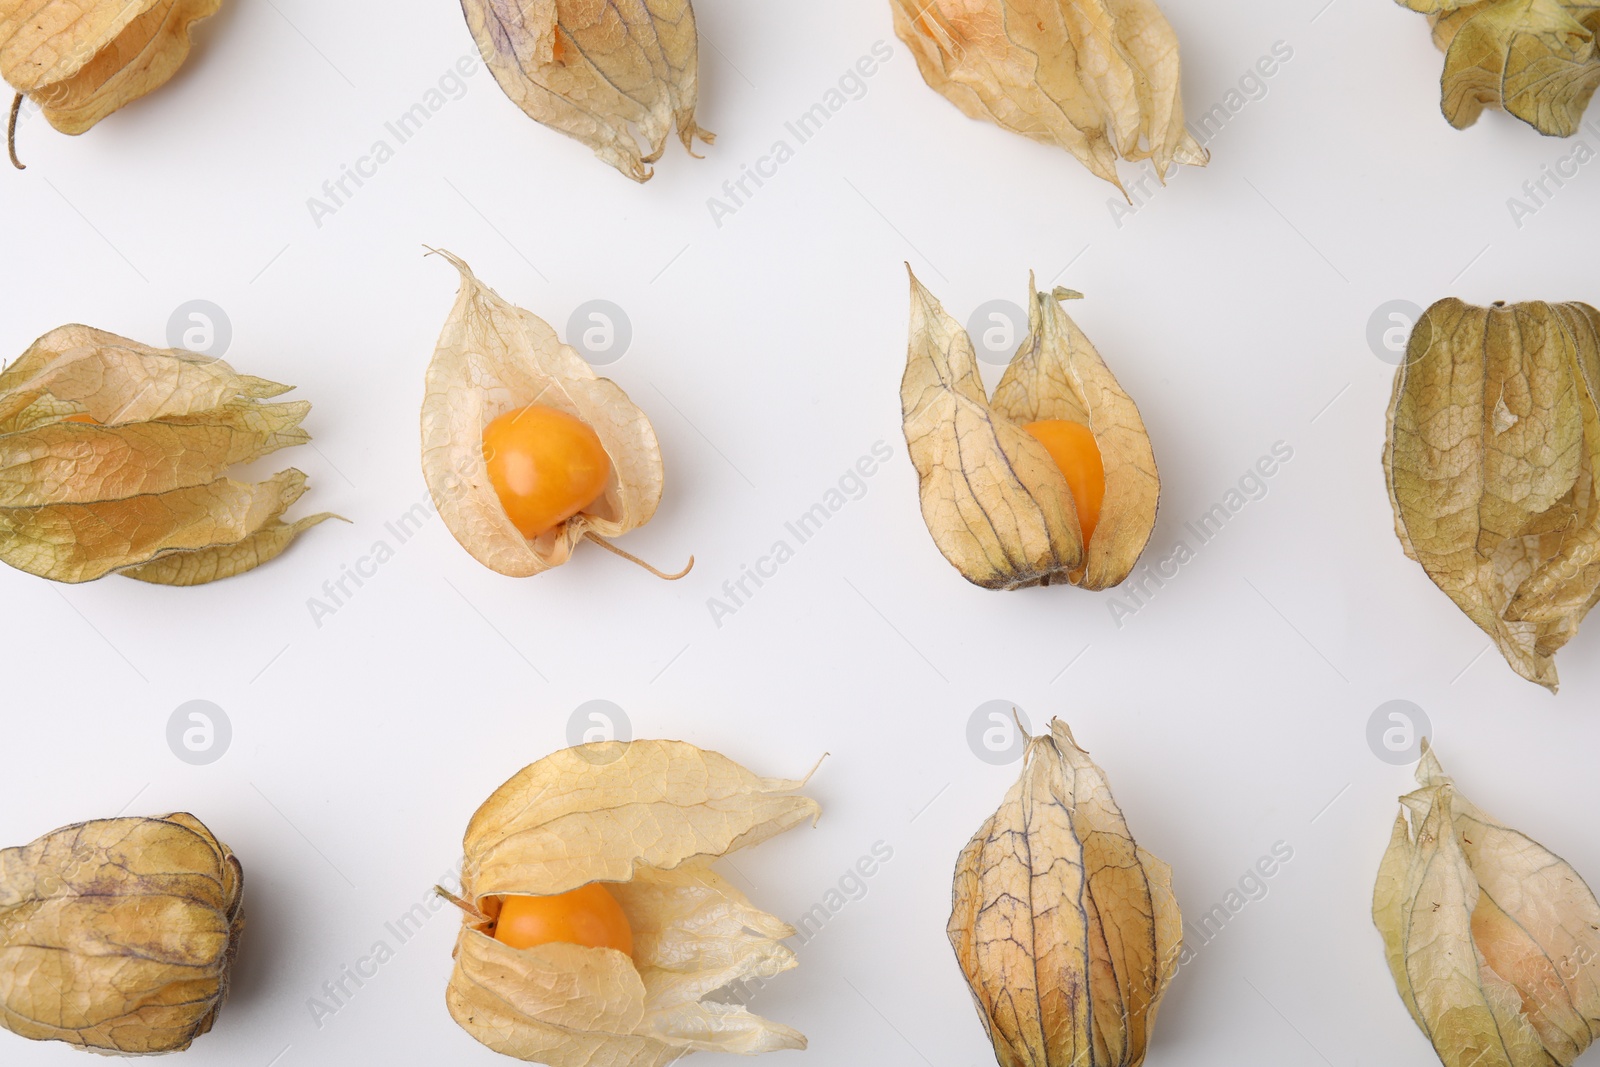 Photo of Ripe physalis fruits with calyxes on white background, flat lay